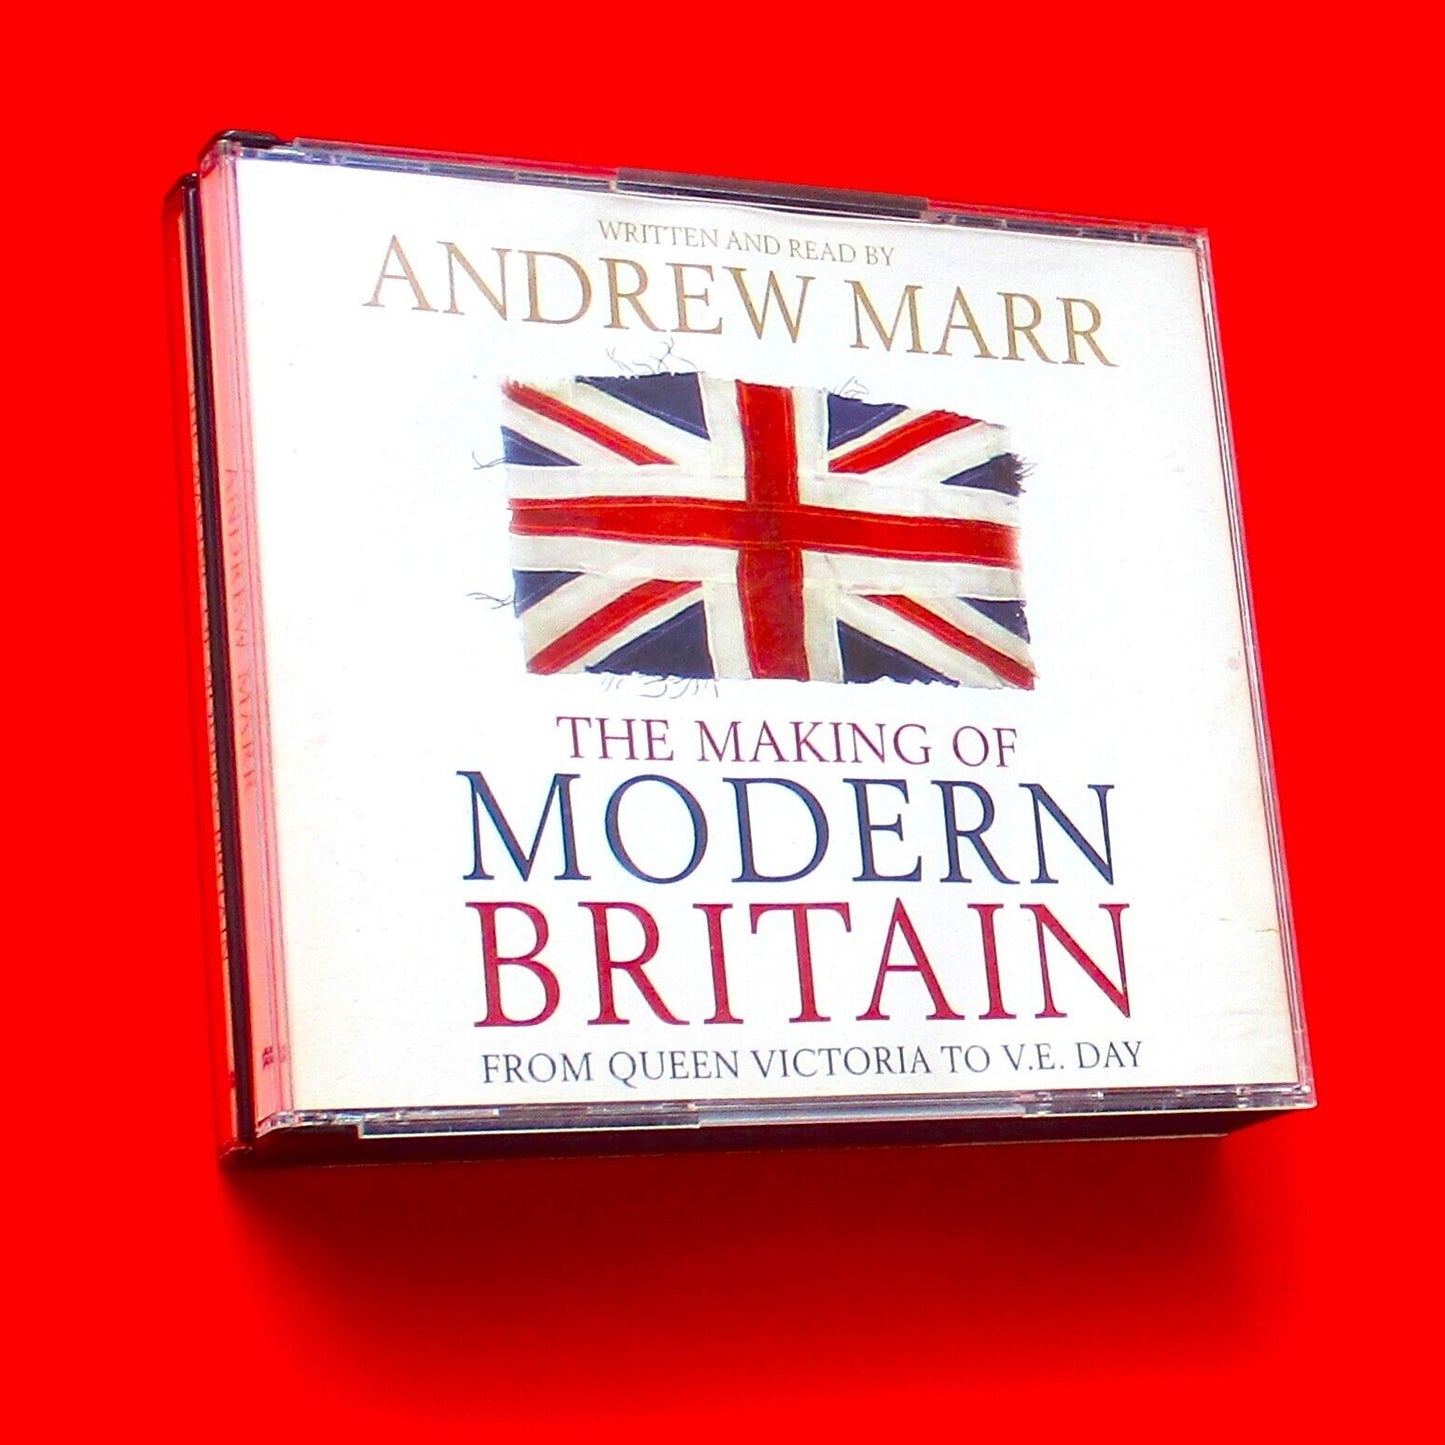 Andrew Marr ‎The Making Of Modern Britain 6 CD Set